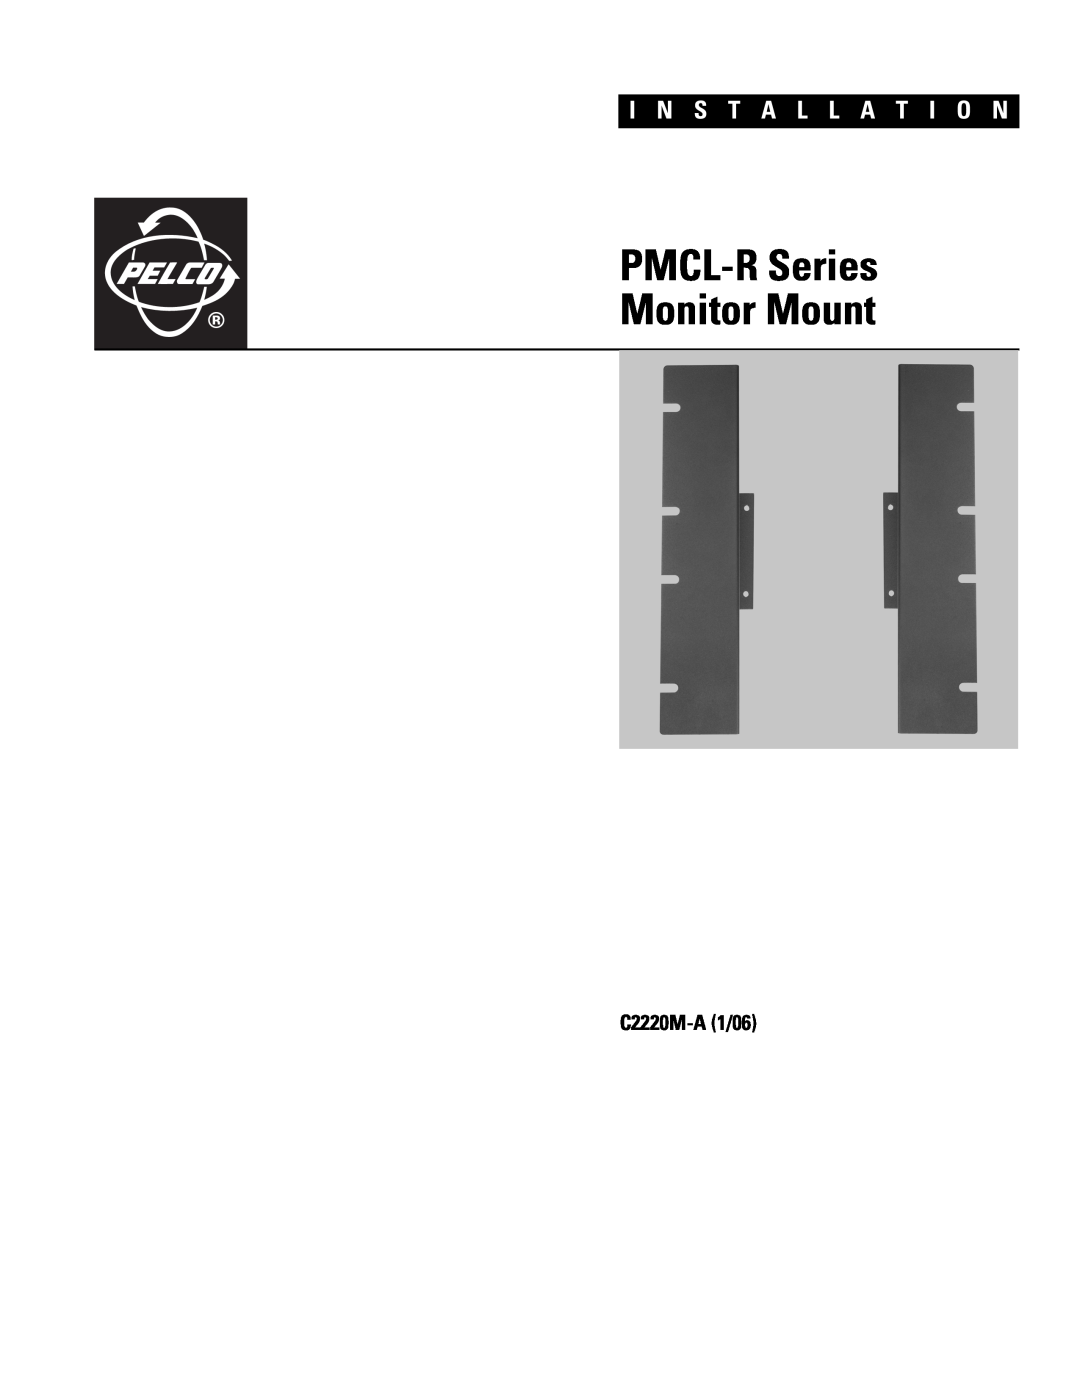 Pelco PMCL-RM19, PMCL-RM17, PMCL-RM15 manual PMCL-R Series Monitor Mount, I N S T A L L A T I O N, C2220M-A 1/06 